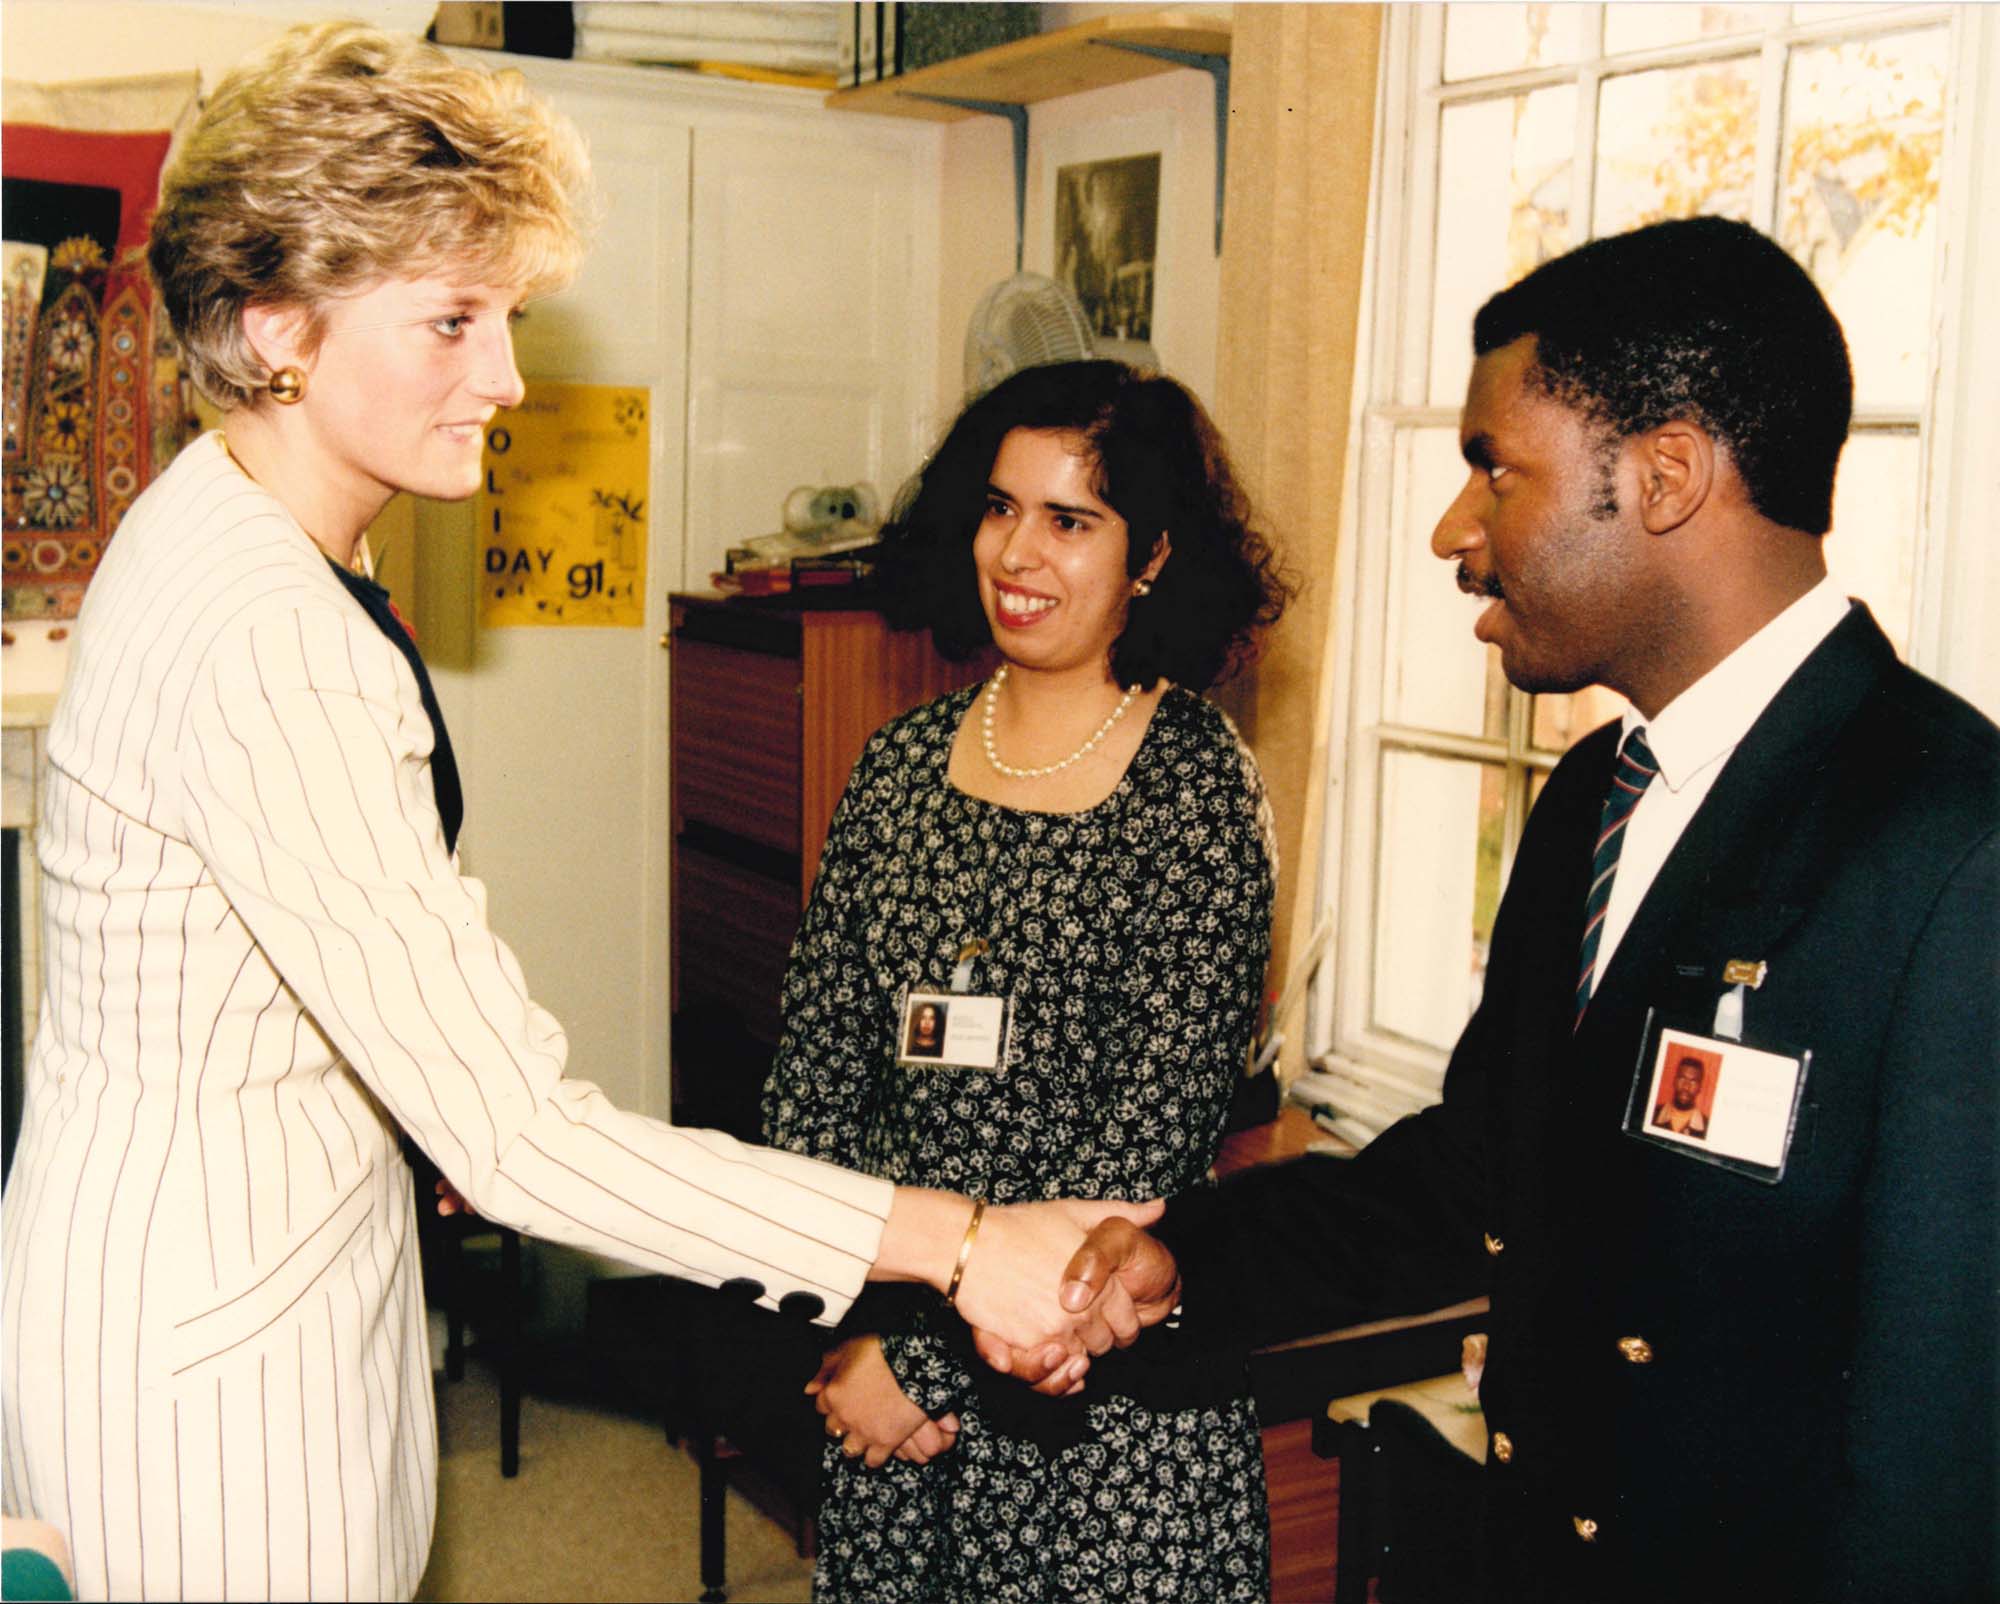 Princess Diana shaking hands with 2 LASS workers, 1991 - Leicester & Leicestershire Record Office